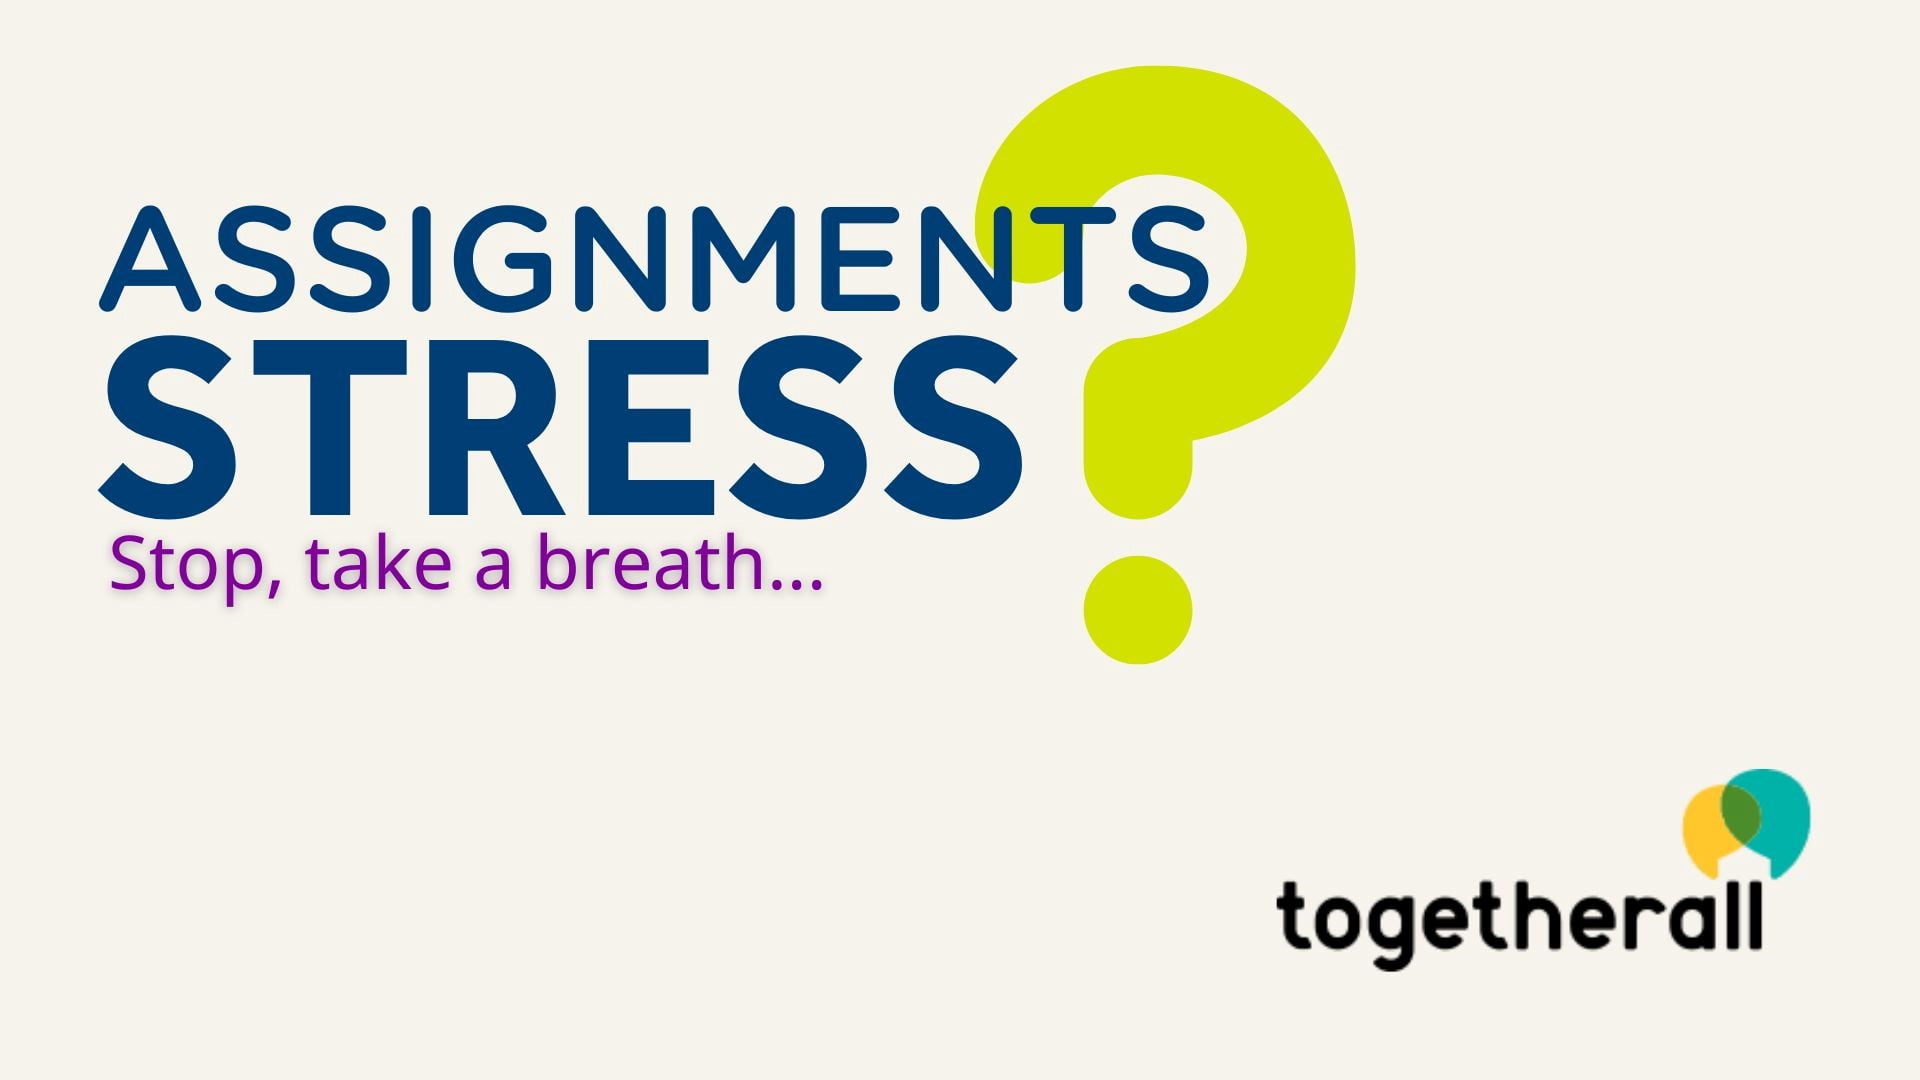 Assignments stress? Stop, take a breath…